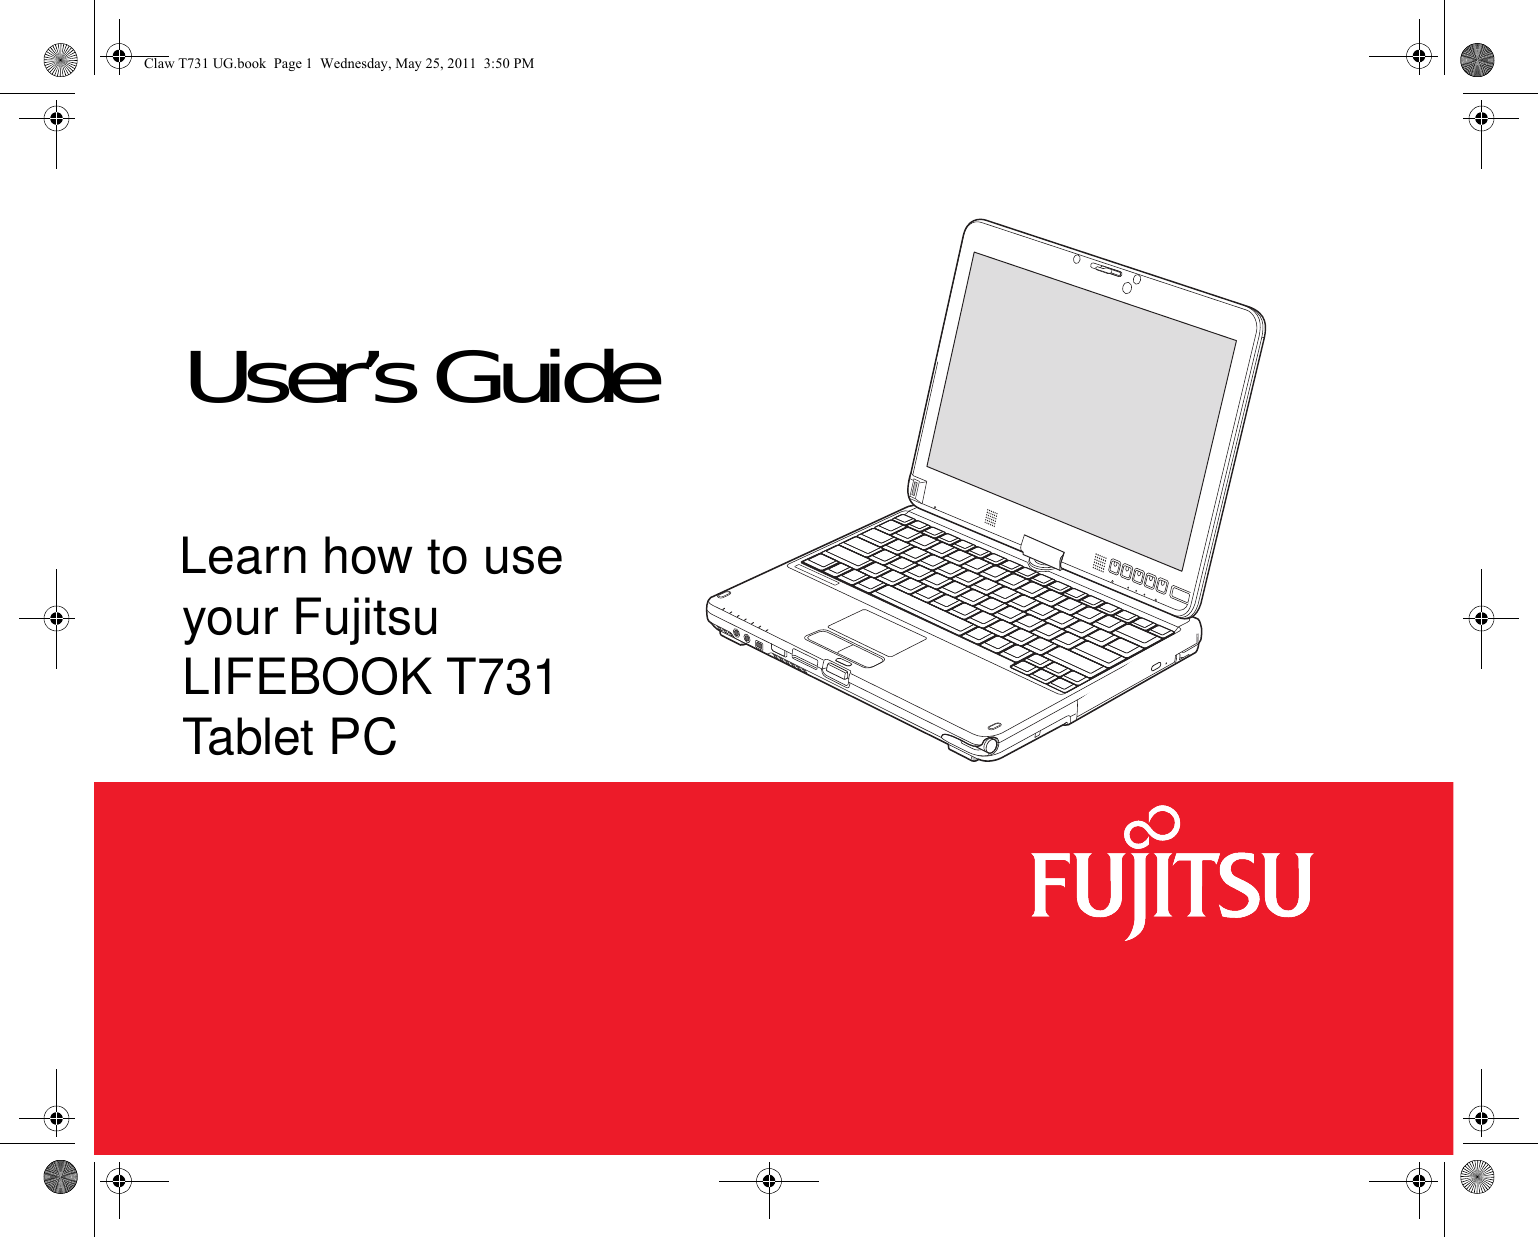  User’s GuideLearn how to use your Fujitsu LIFEBOOK T731 Tablet PCClaw T731 UG.book  Page 1  Wednesday, May 25, 2011  3:50 PM